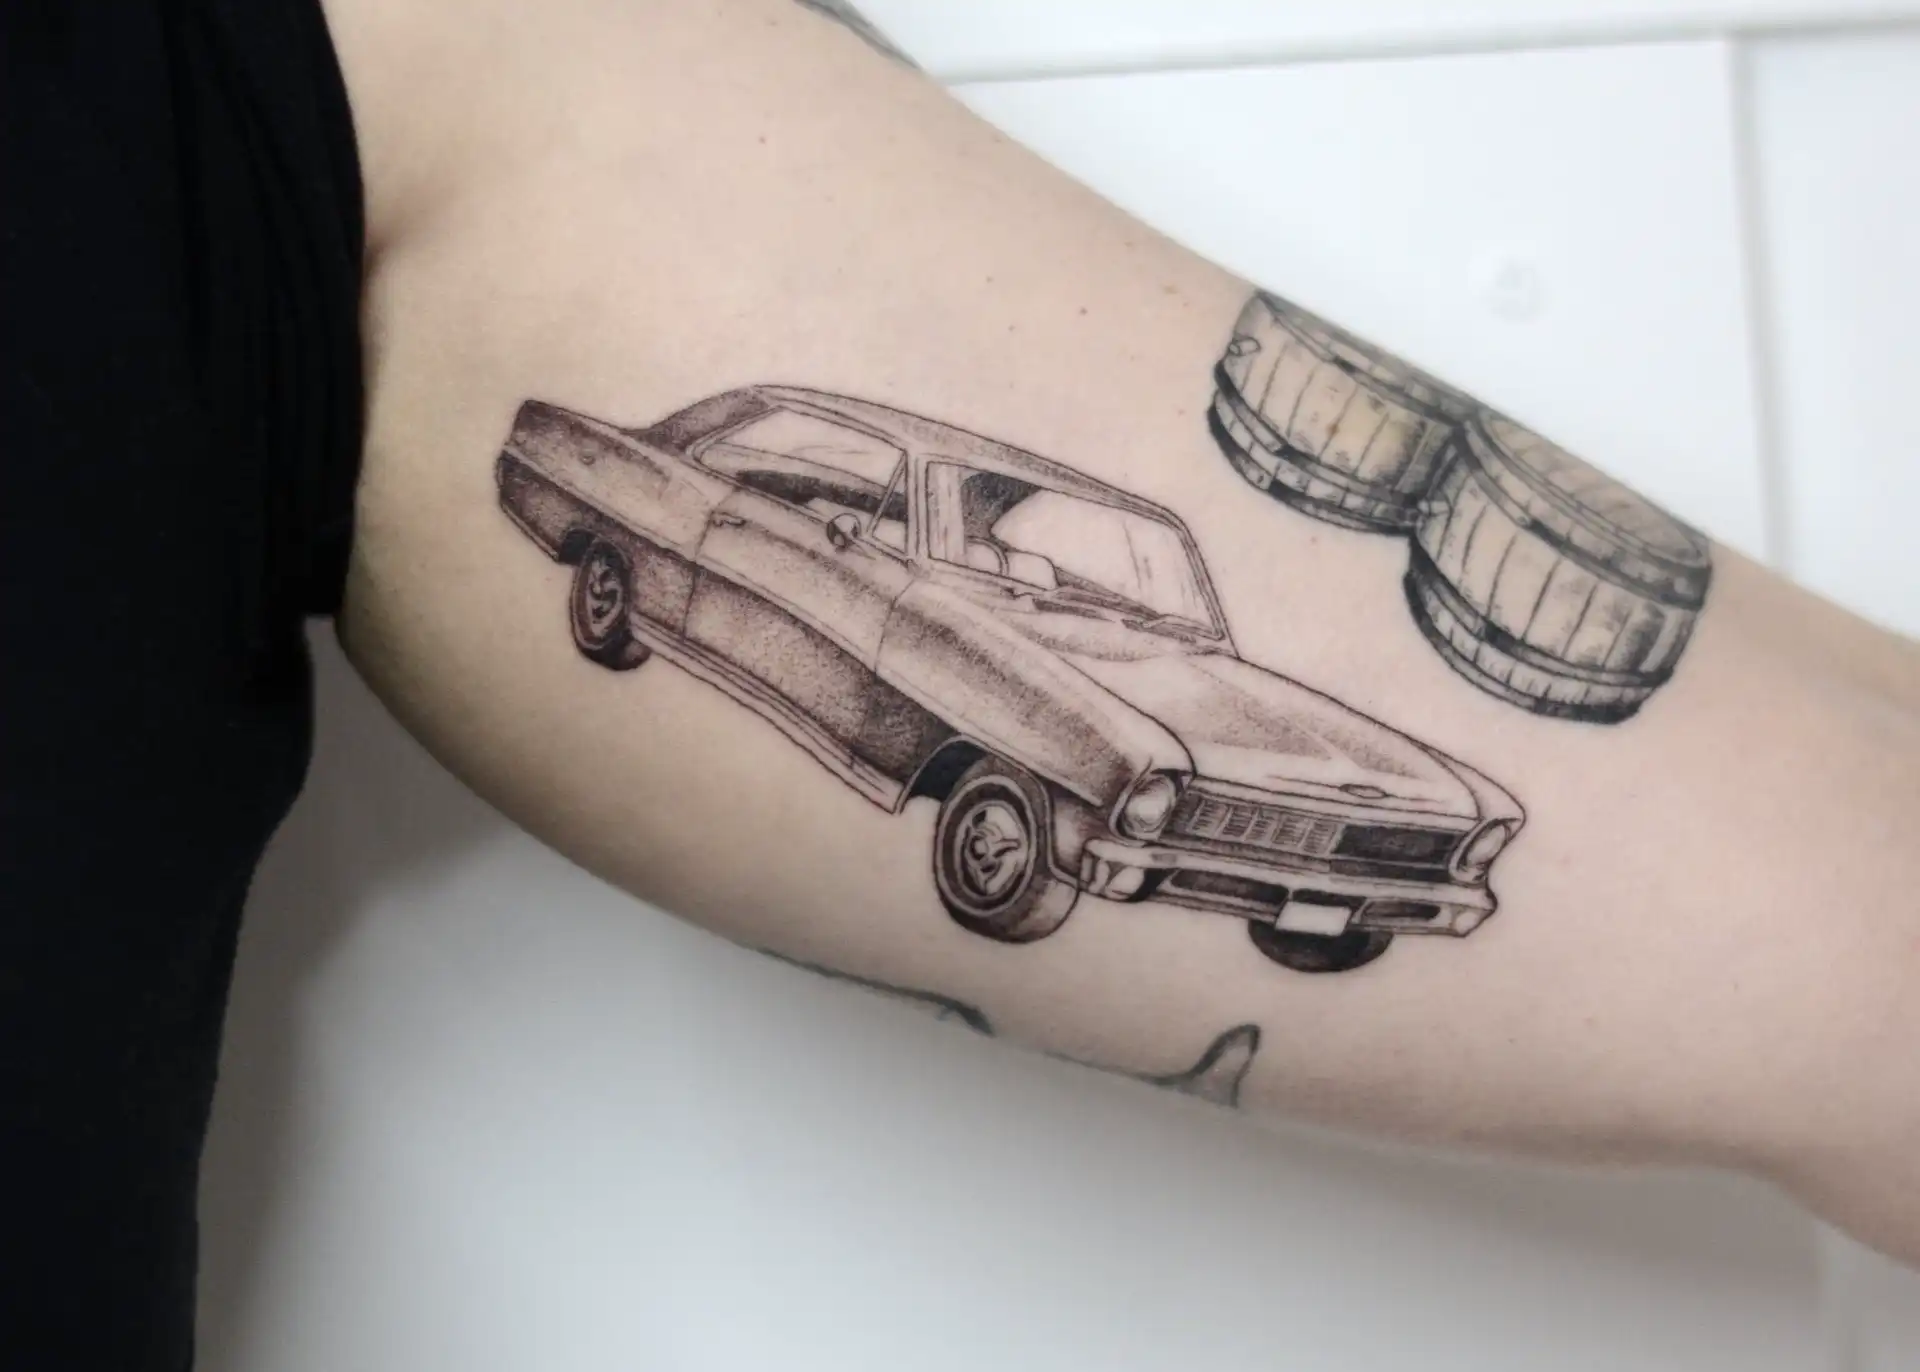 Car tattoo Fine Line Tattoos by Rorschach Tattoo Shop and Piercing Studio and Milk District Tattoo Shop Near Me